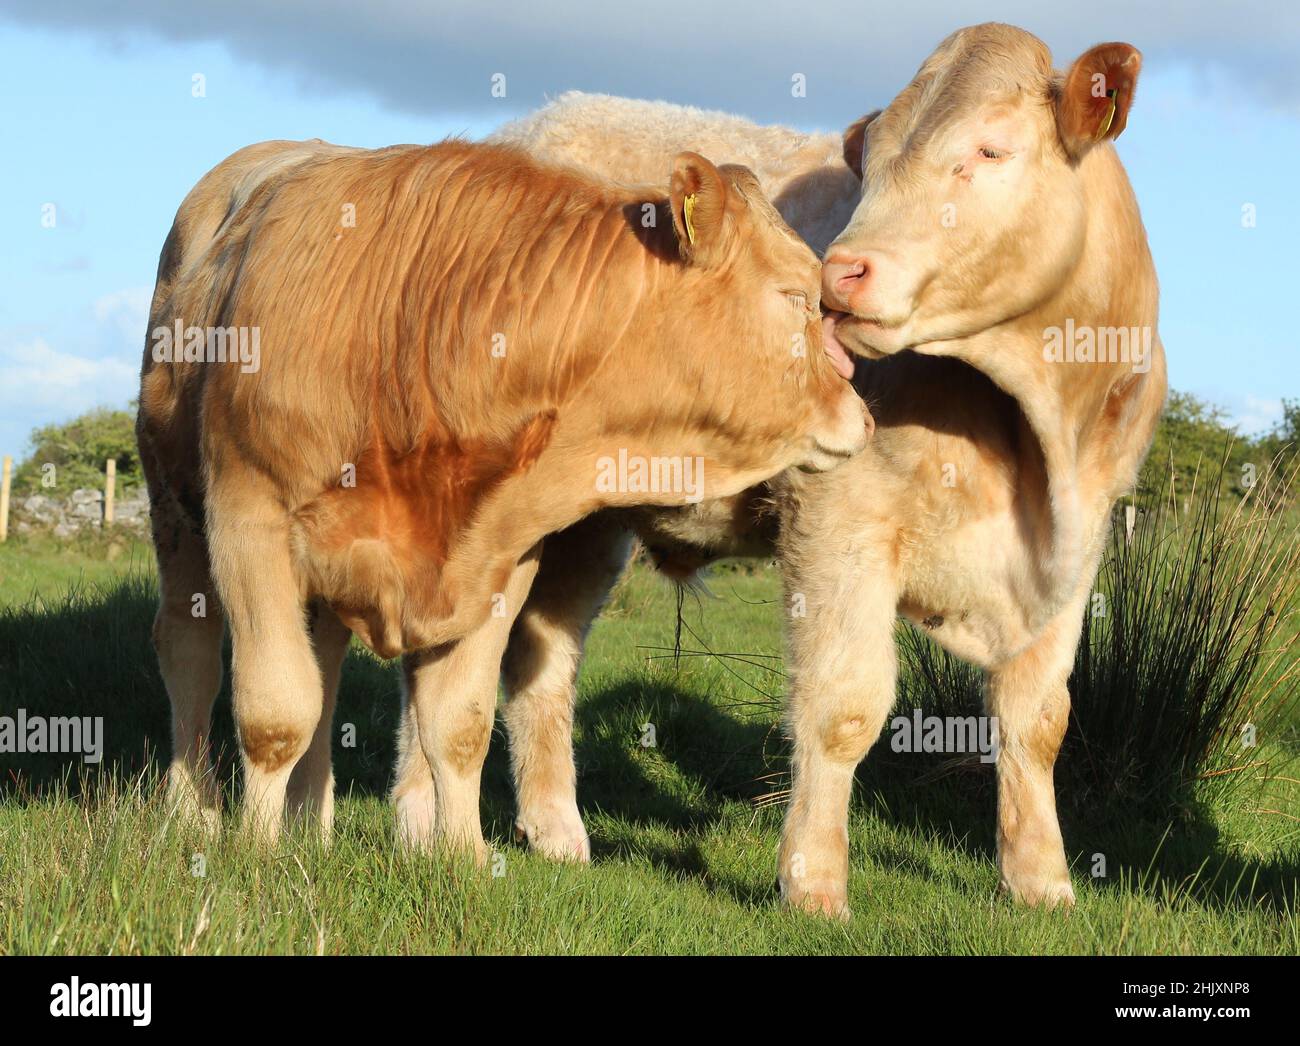 Two Charolais breed cattle - one grooming another - on farmland in rural Ireland Stock Photo